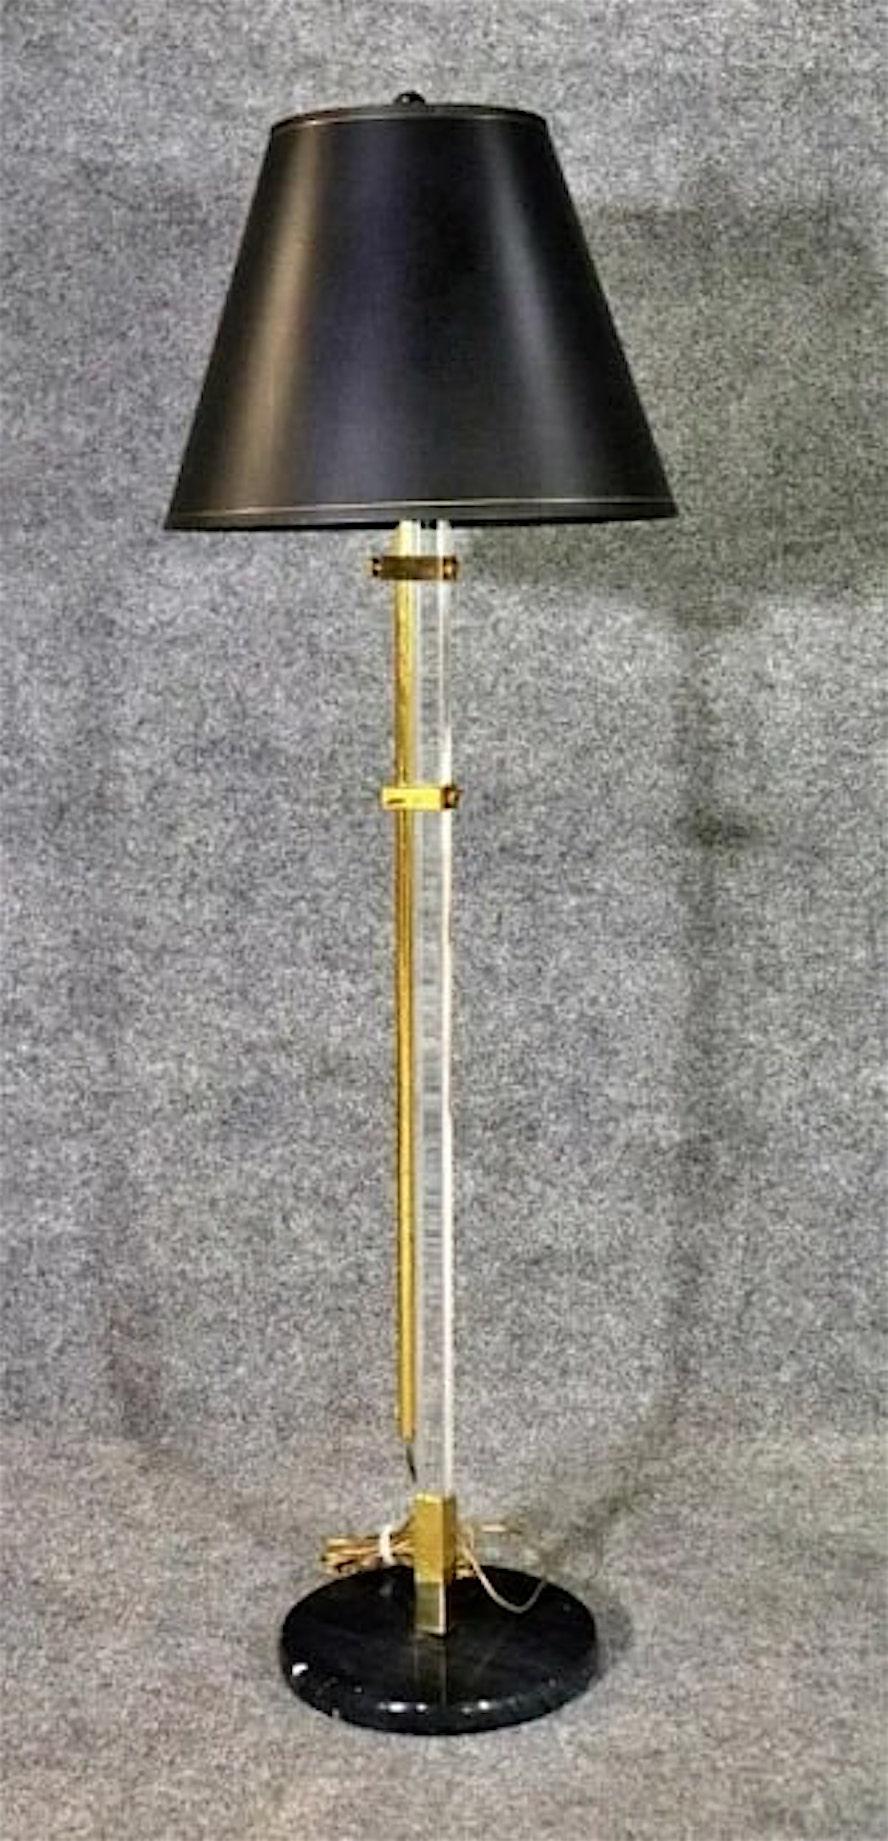 Adjustable floor lamp with polished brass and clear lucite, set on a black marble base, with black and gold shade.
Base: 10